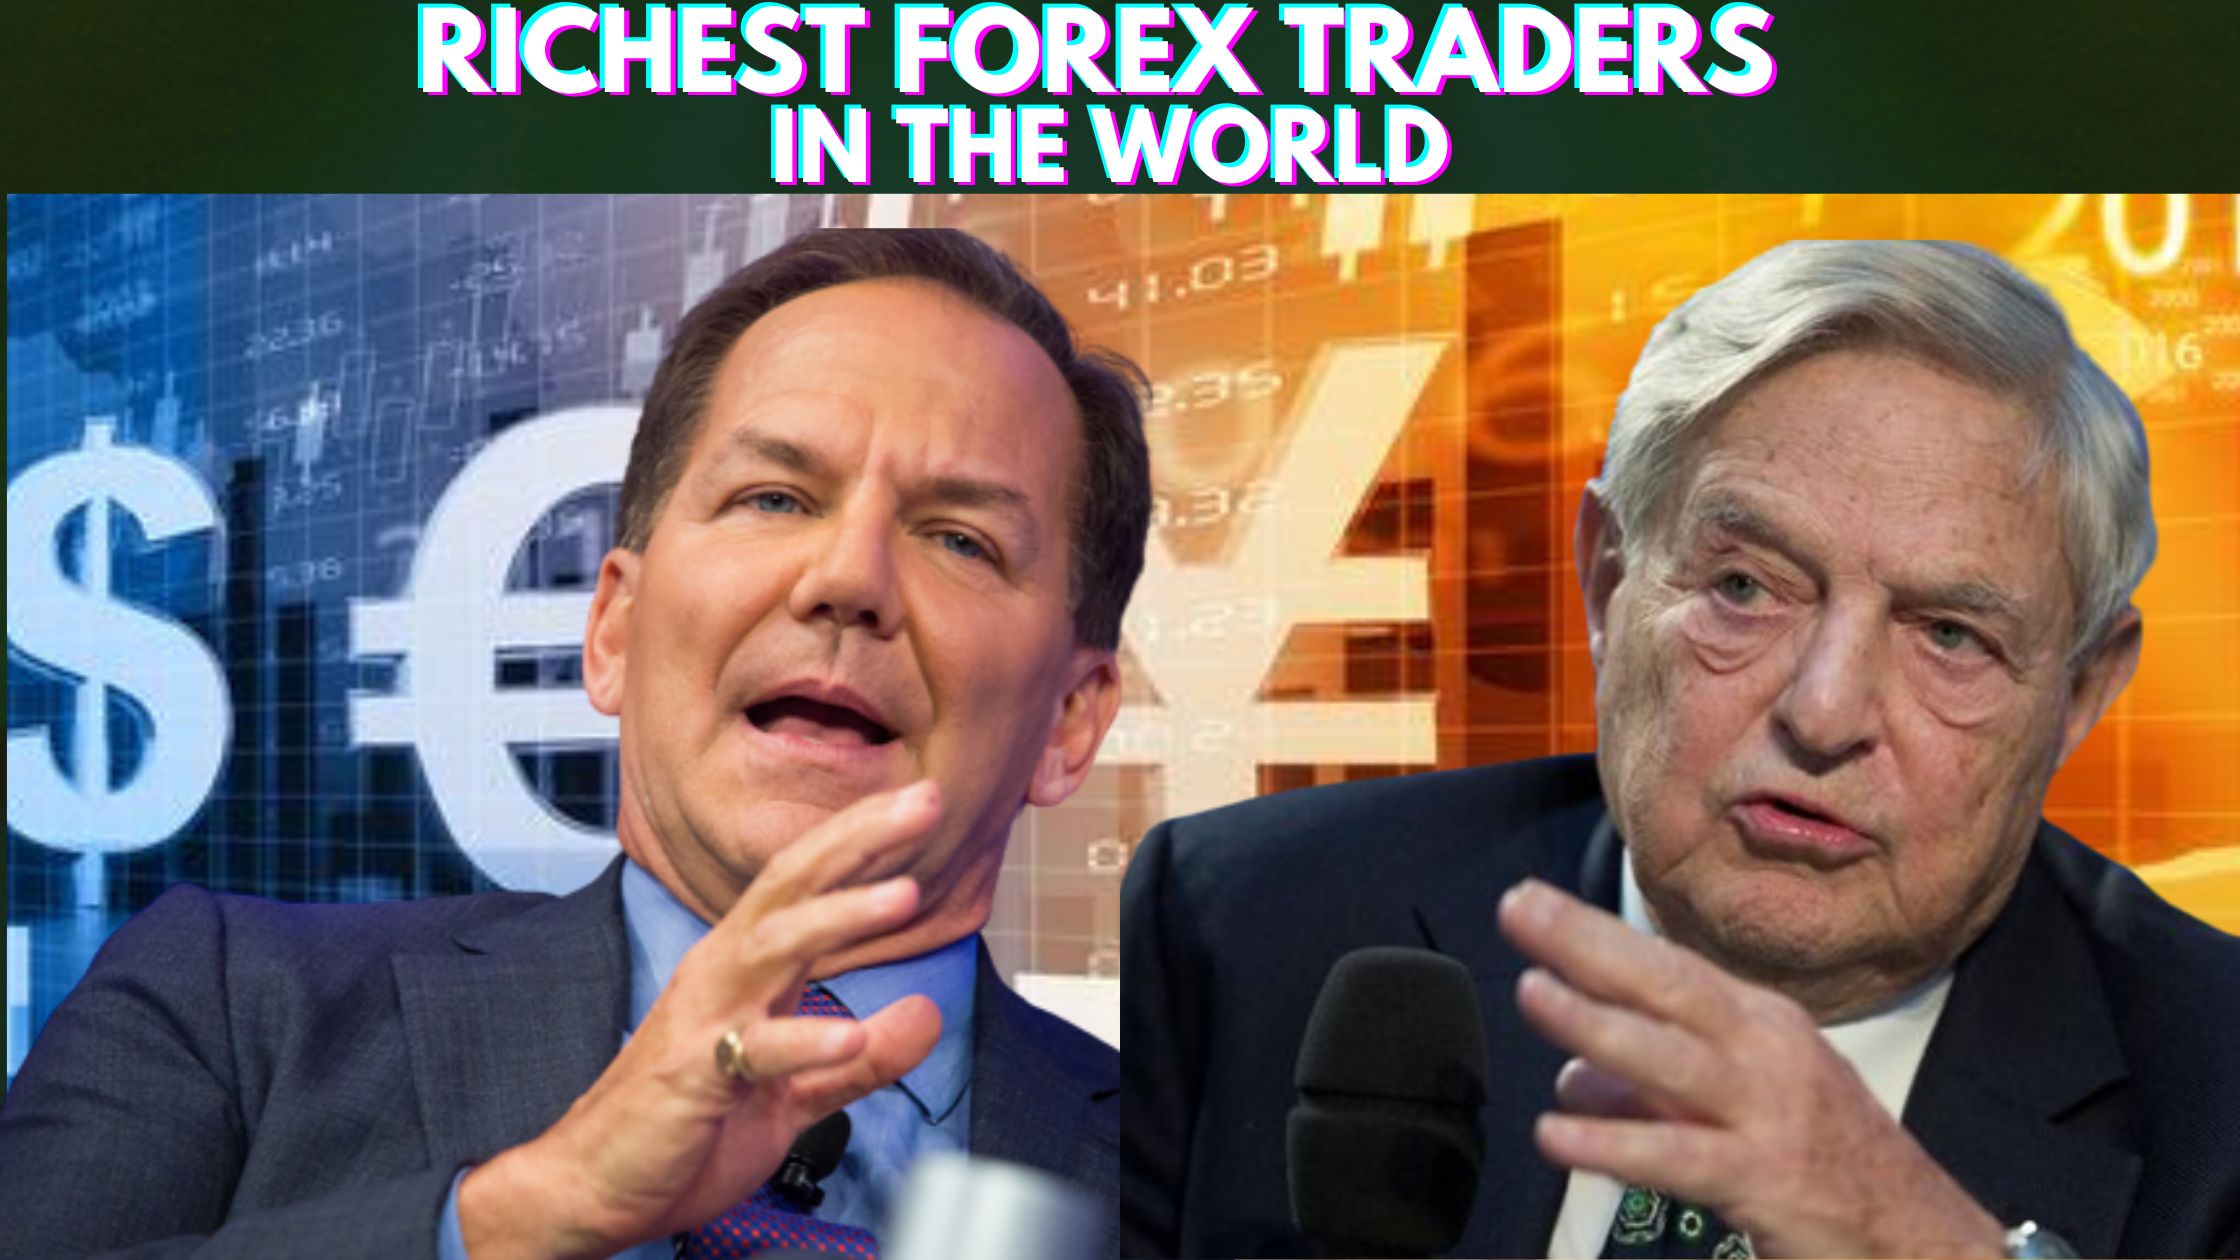 Top 10 Richest Forex Traders In The World 2022